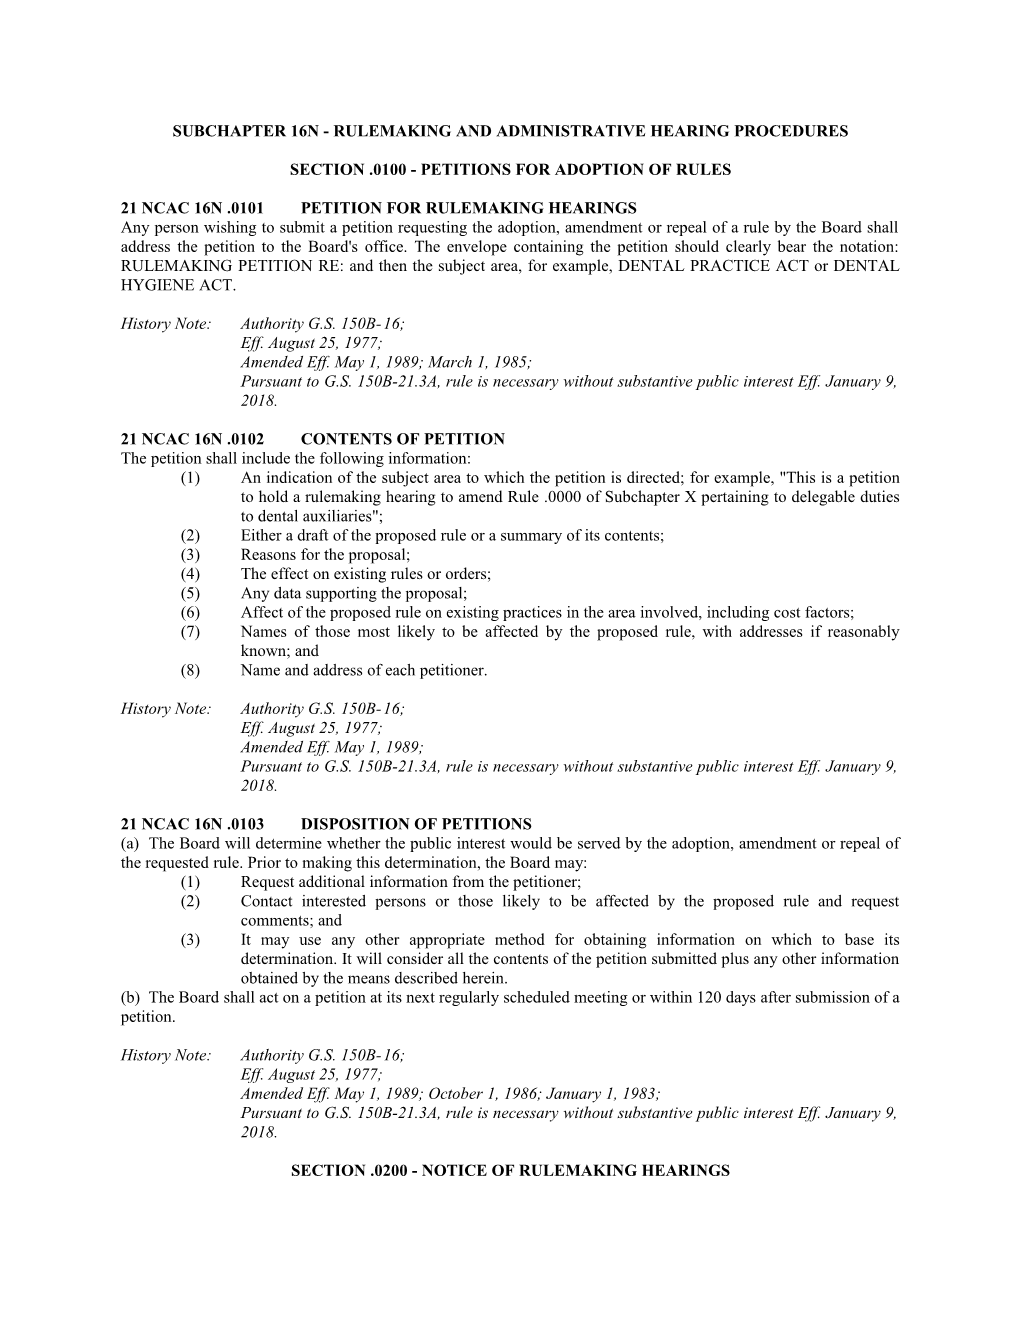 Subchapter 16N Rulemaking and Administrative Hearing Procedures